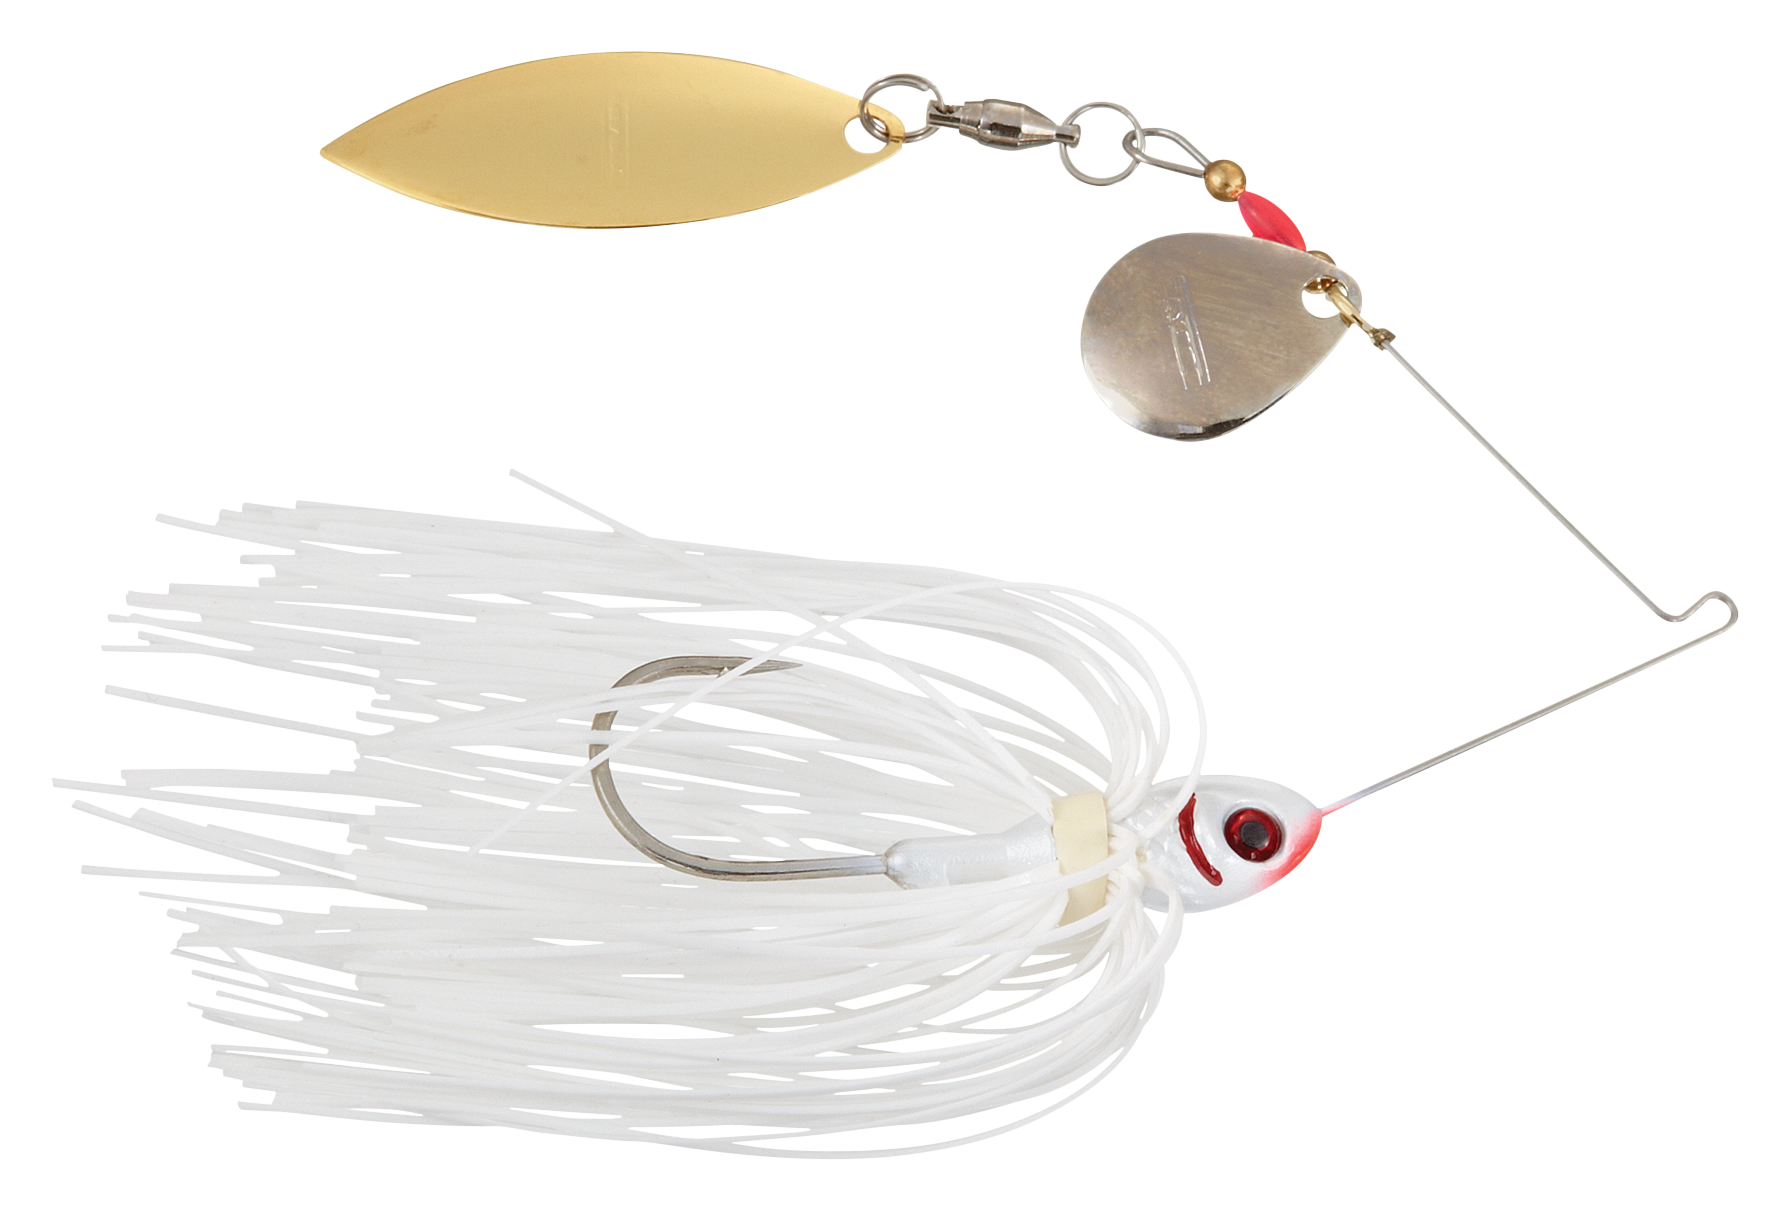  Booyah J.C. Covert Spinnerbait, 1oz, N/G Tand Jc Special,  BYCVS1NGT726 : Sports & Outdoors